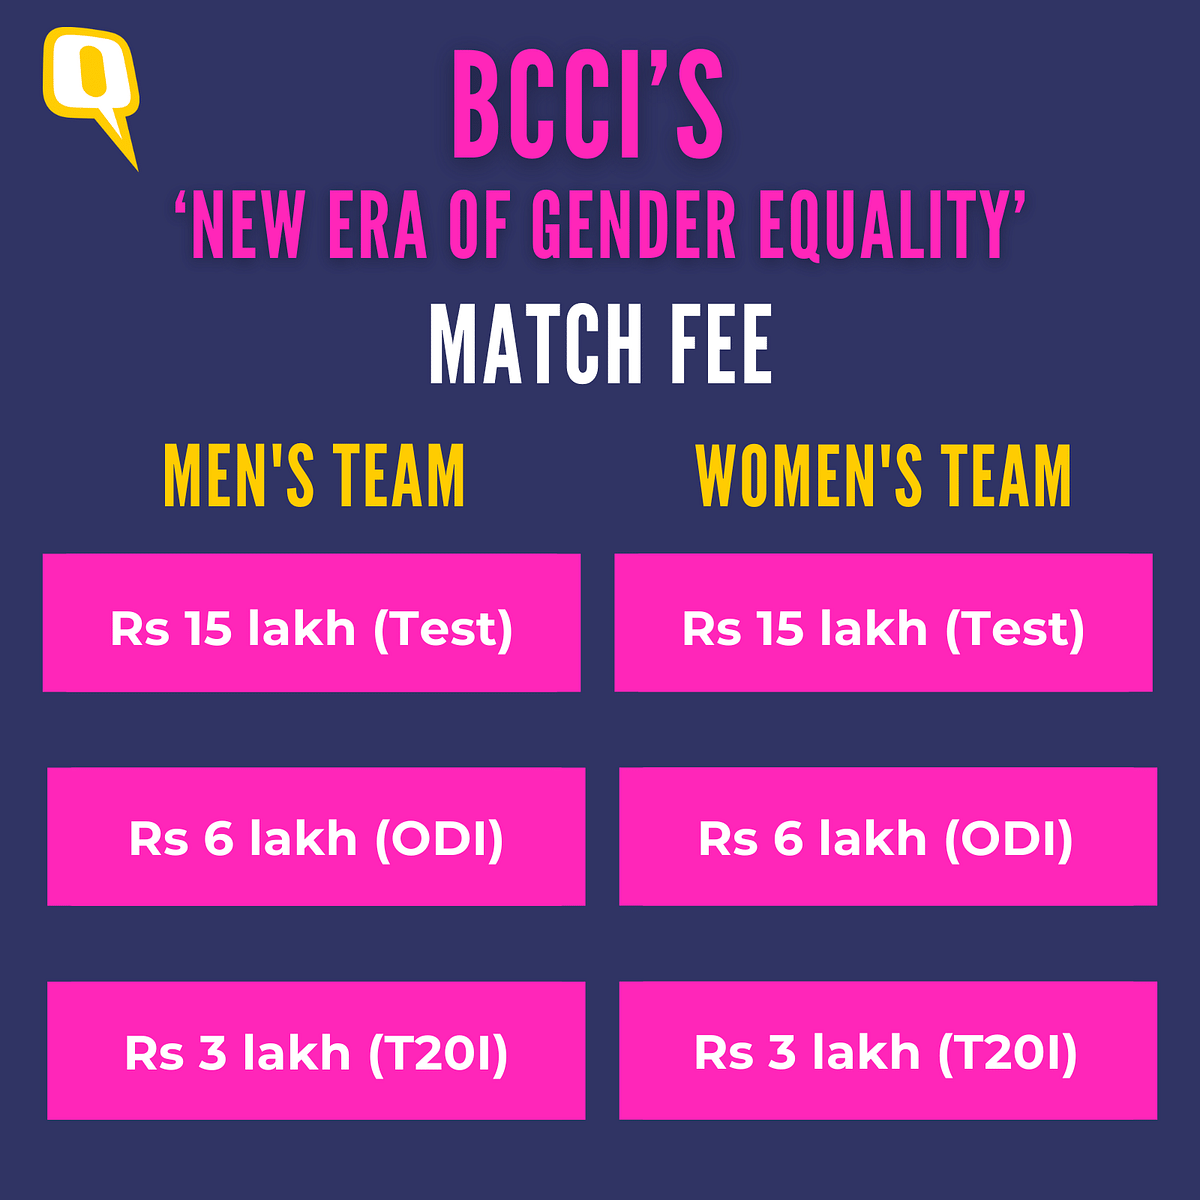 BCCI announced on Thursday that the men's and women's international teams will receive equal match fee.